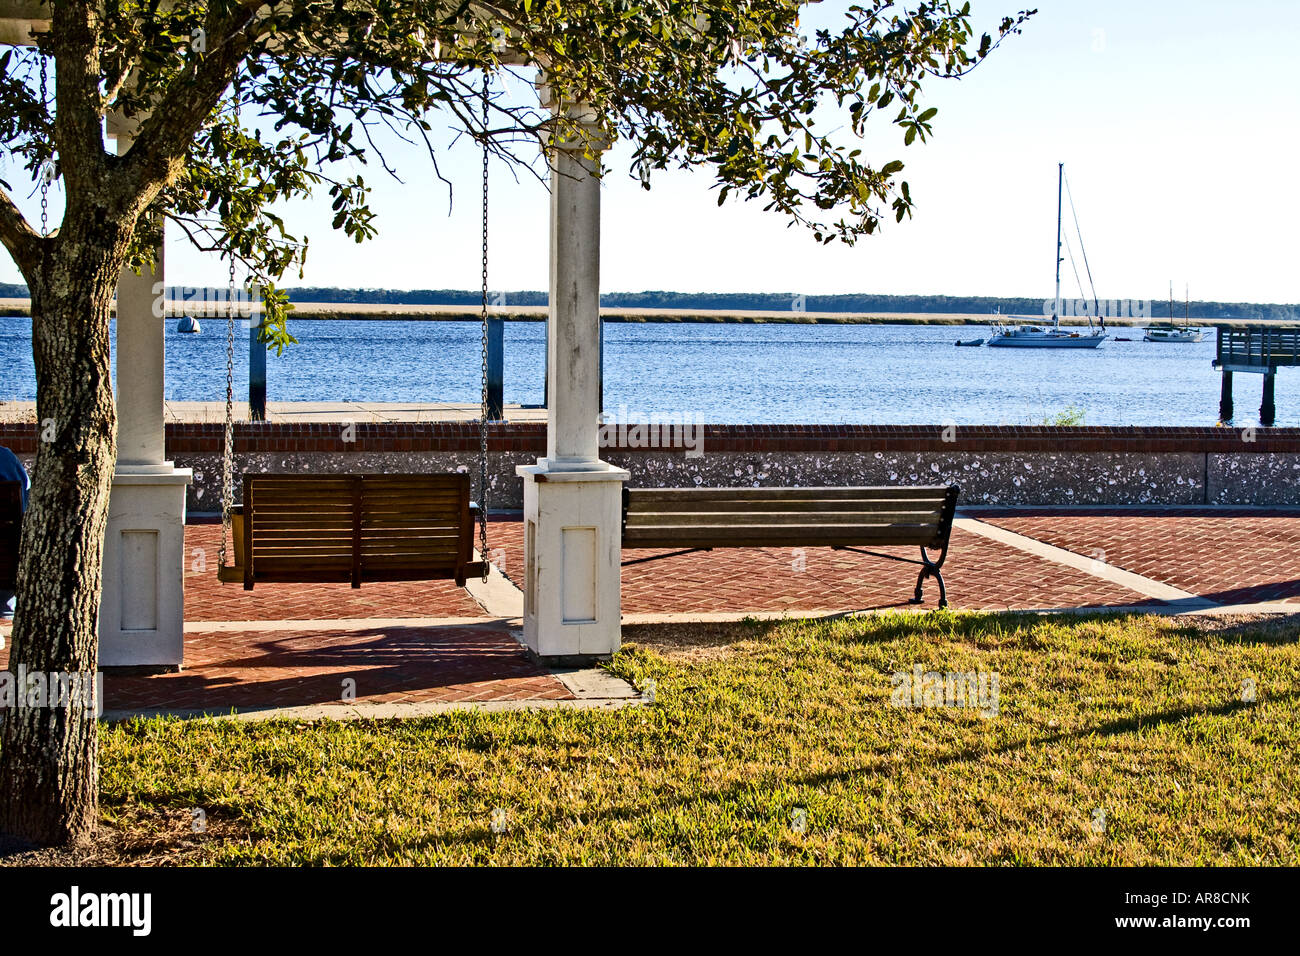 Swing an a bench overlooking a harbour with a sailboat on a calm day. Stock Photo